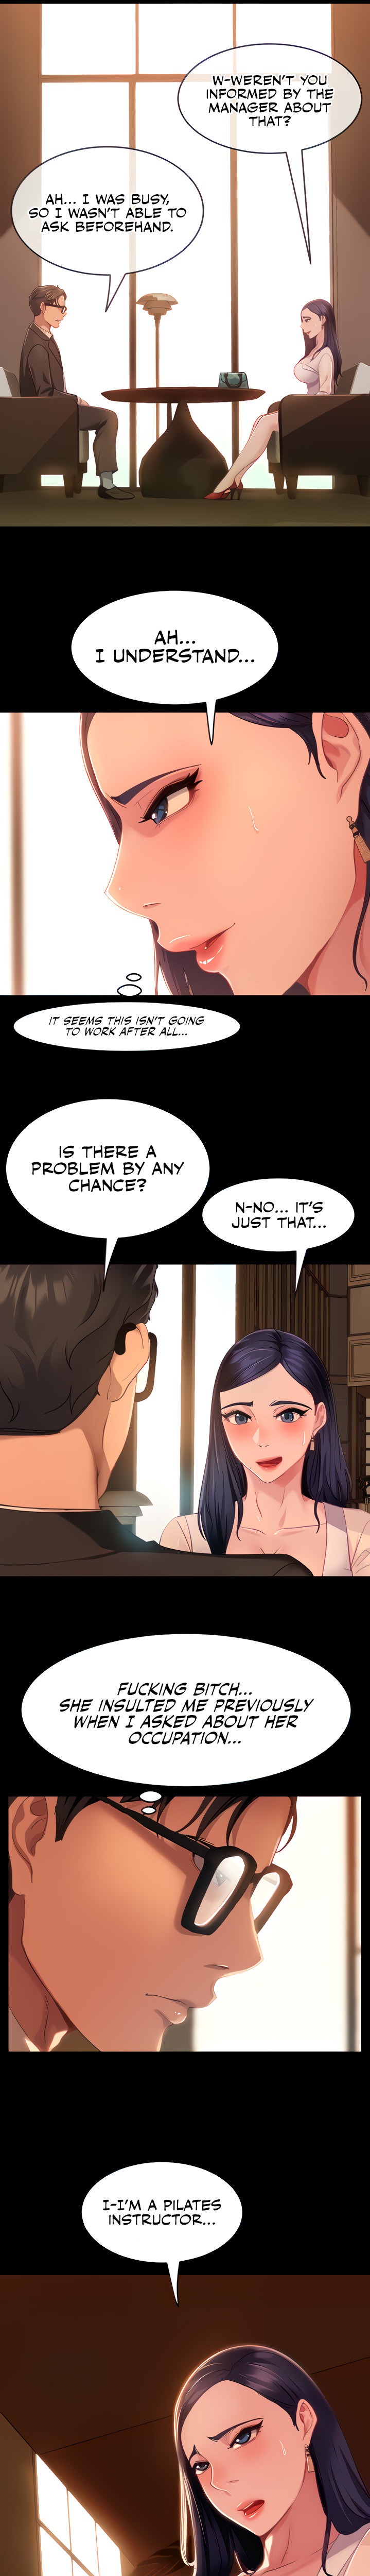 Marriage Agency Review - Chapter 4 Page 5